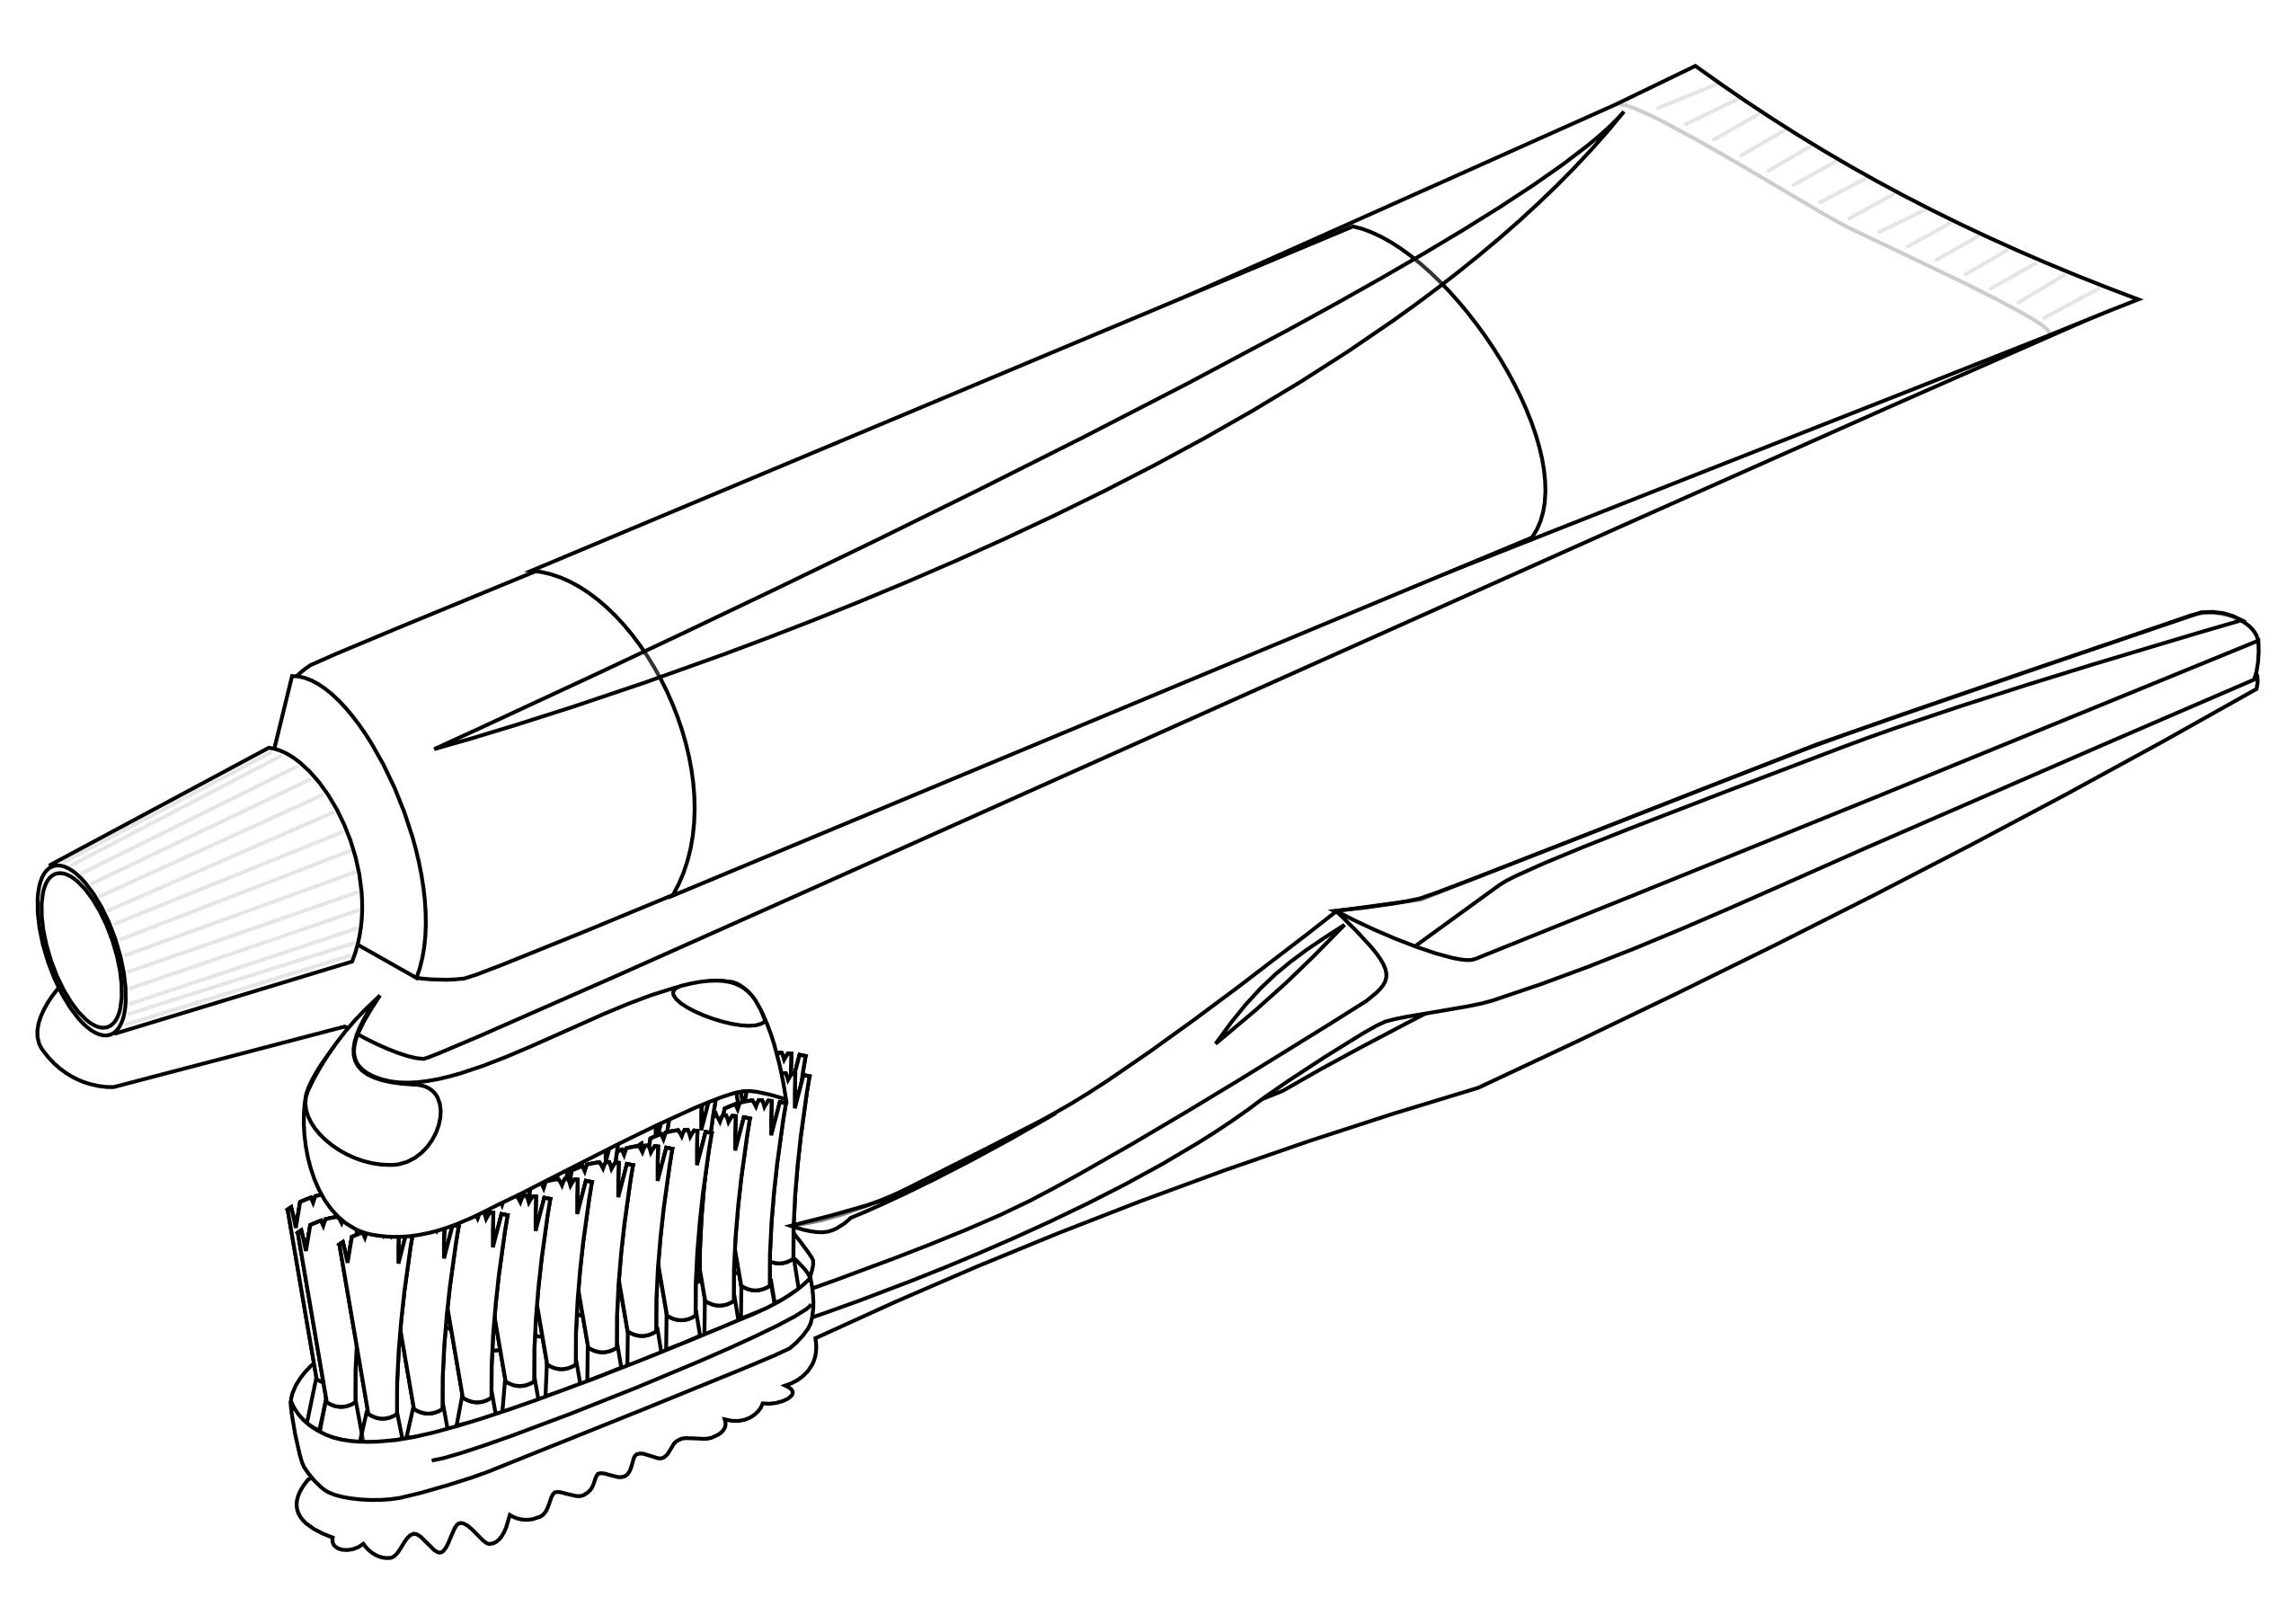 Toothbrush 3 Black White Line Art Scalable Vector Graphics